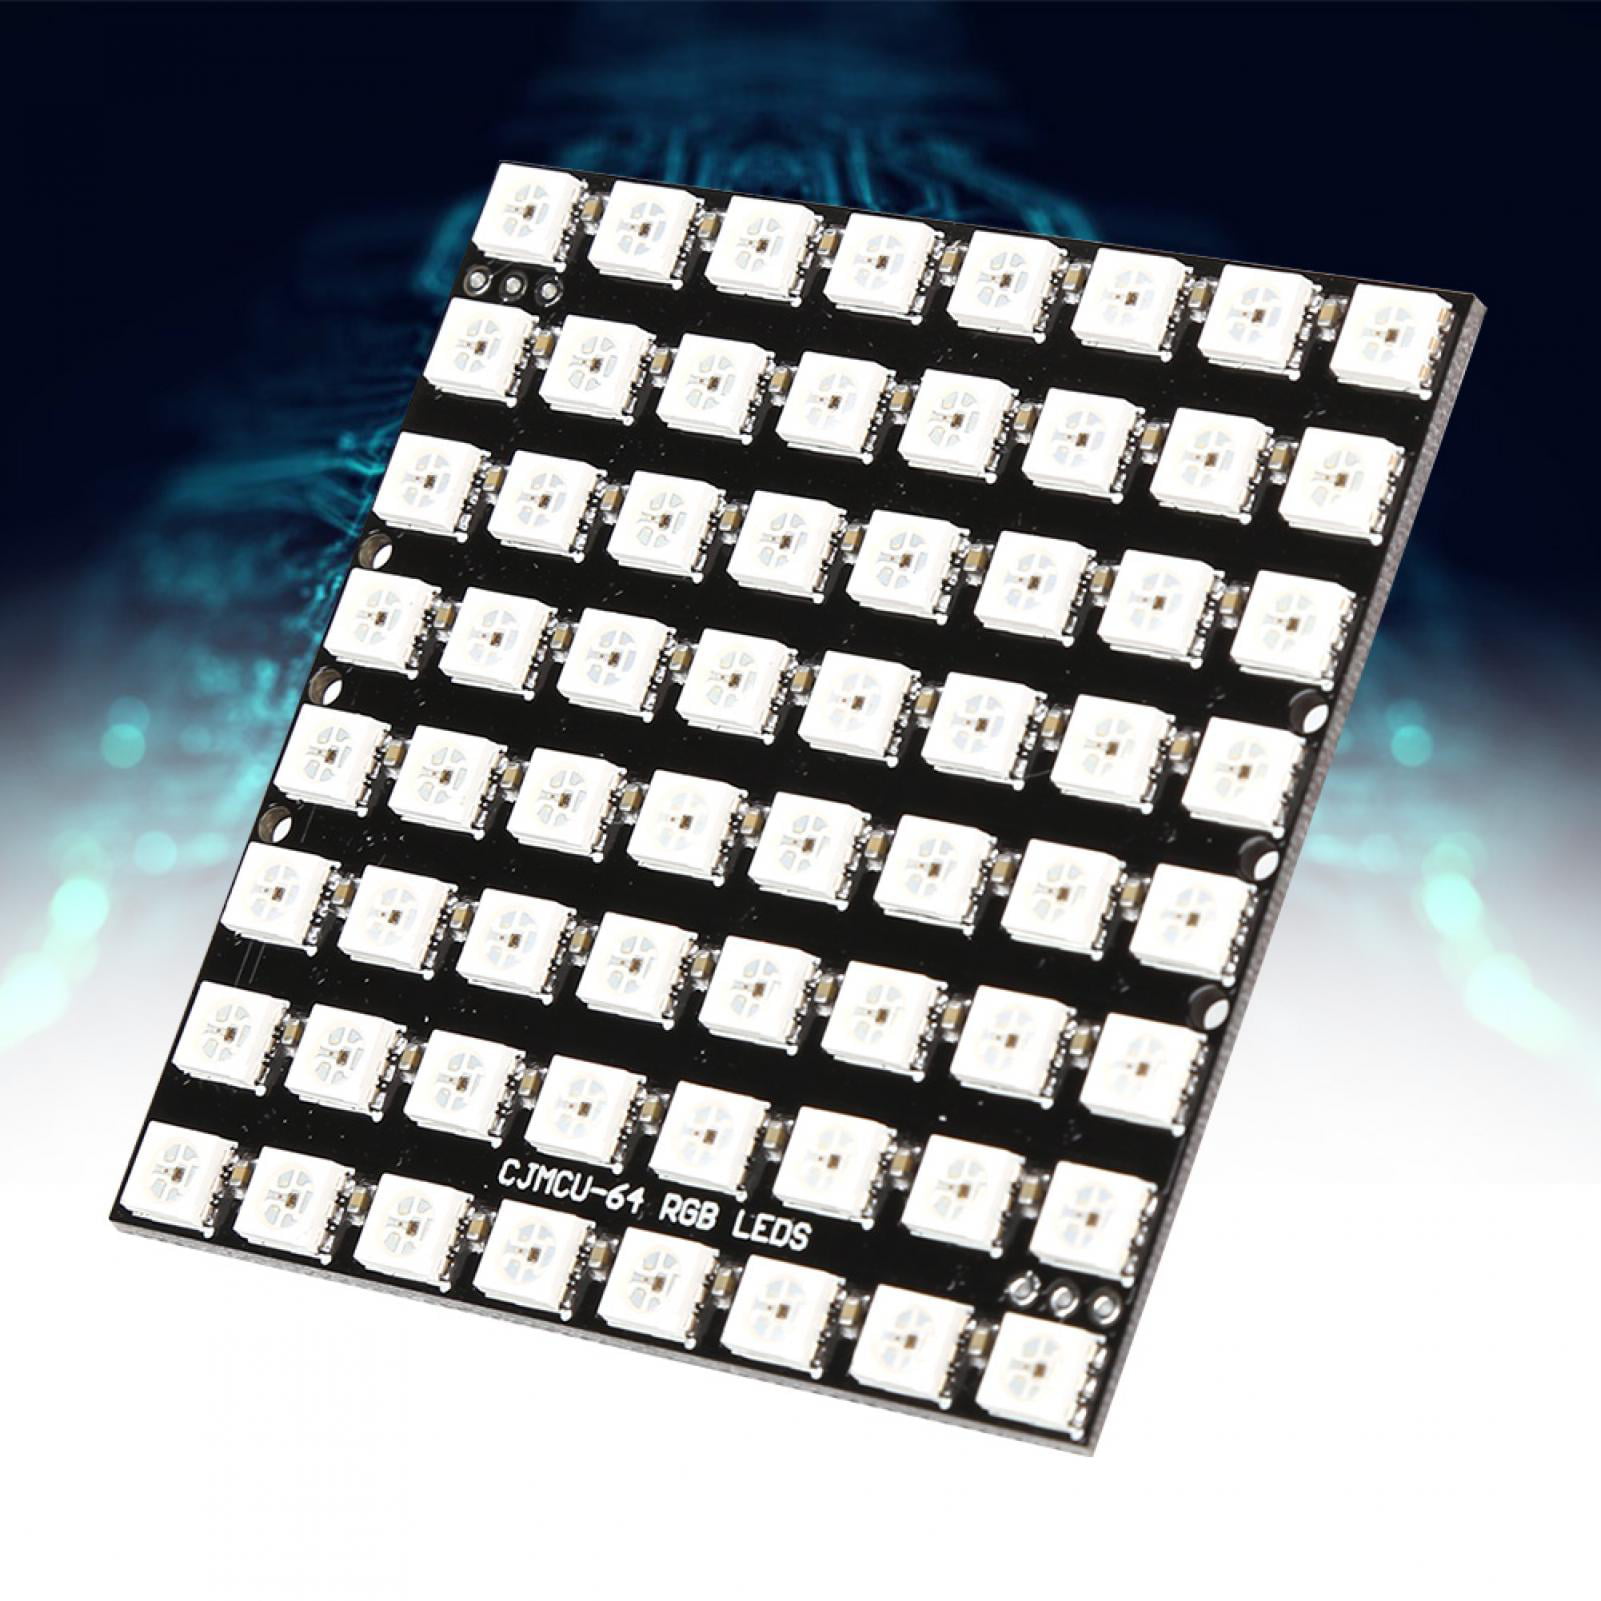 Low Power Consumption LED Development Board,8x8 LED Board,64Digit LED Development Board,LED Development Board with Built-in Full Color Driver WS2812 5050 RGB LED 5VDC,high Brightness 